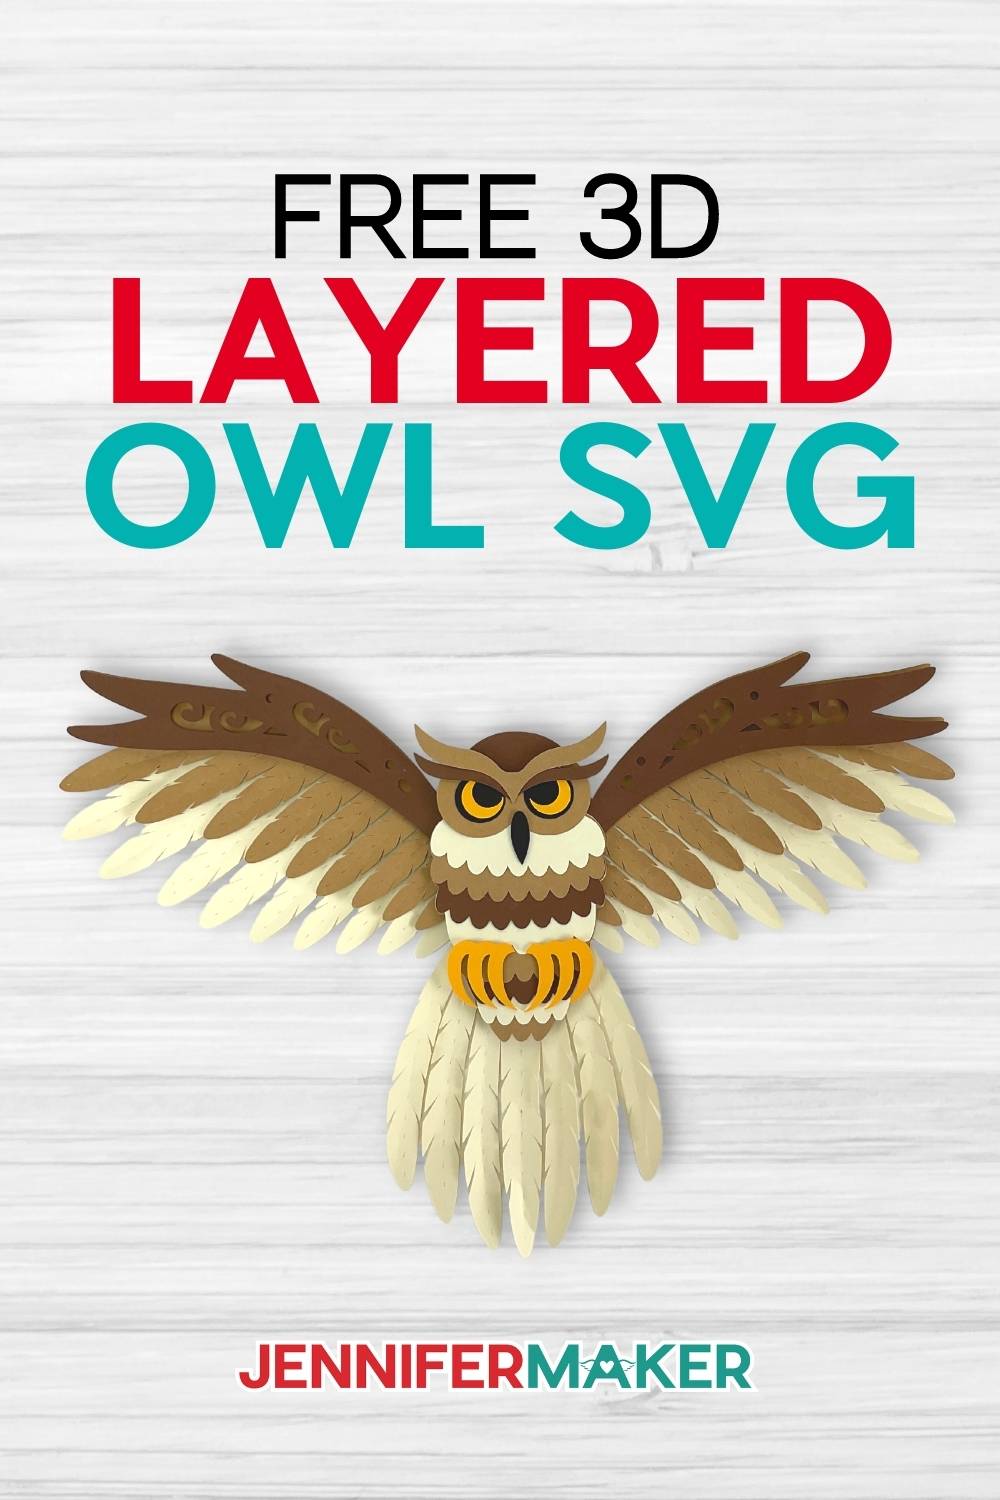 Free 3D Layered Owl SVG by JenniferMaker - Framed papercraft layered owl made of tan, brown, black, and yellow cardstock with spread wings under the words Free 3D Layered Owl SVG on a gray background